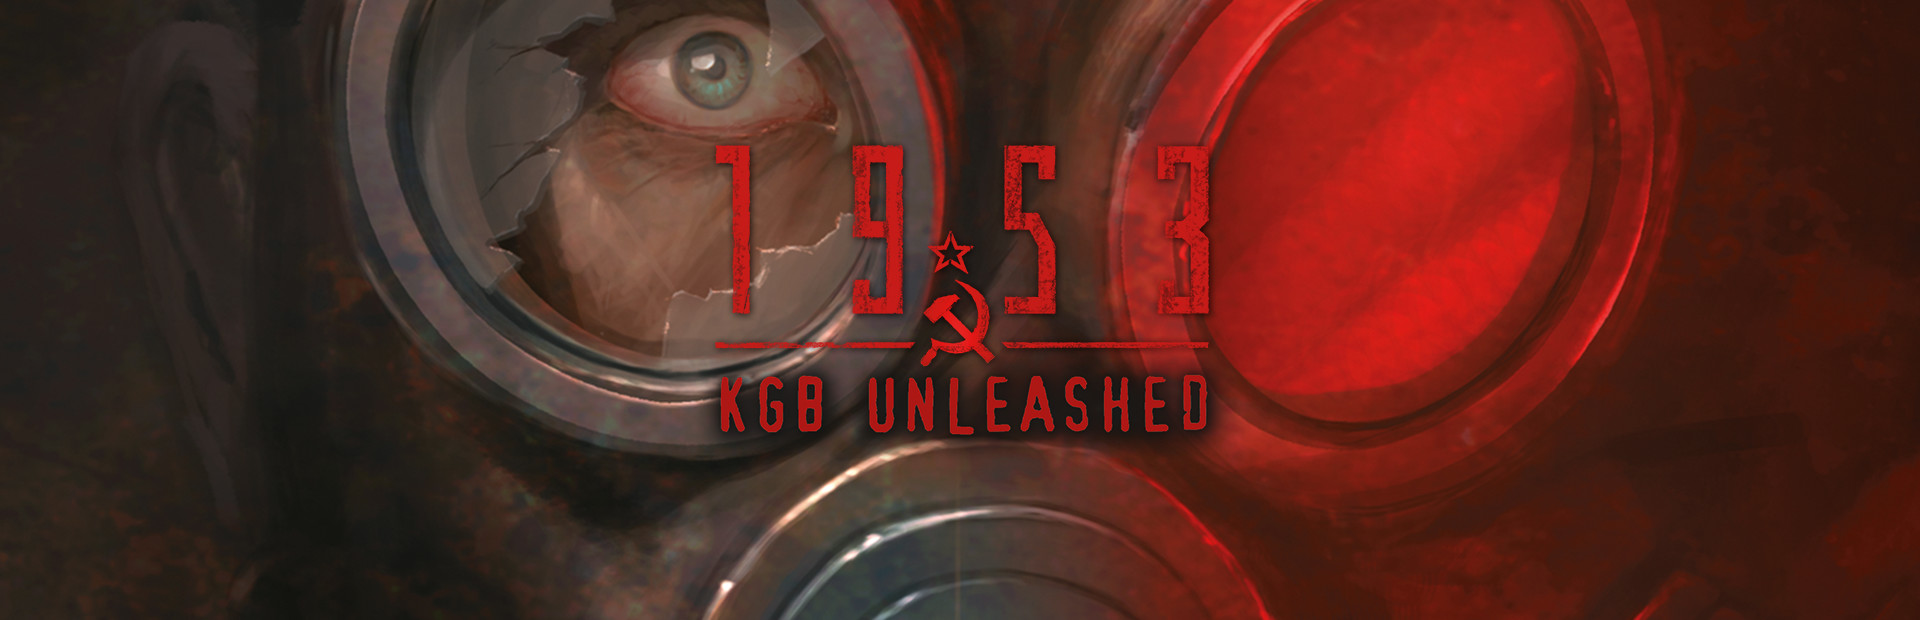 1953 - KGB Unleashed cover image